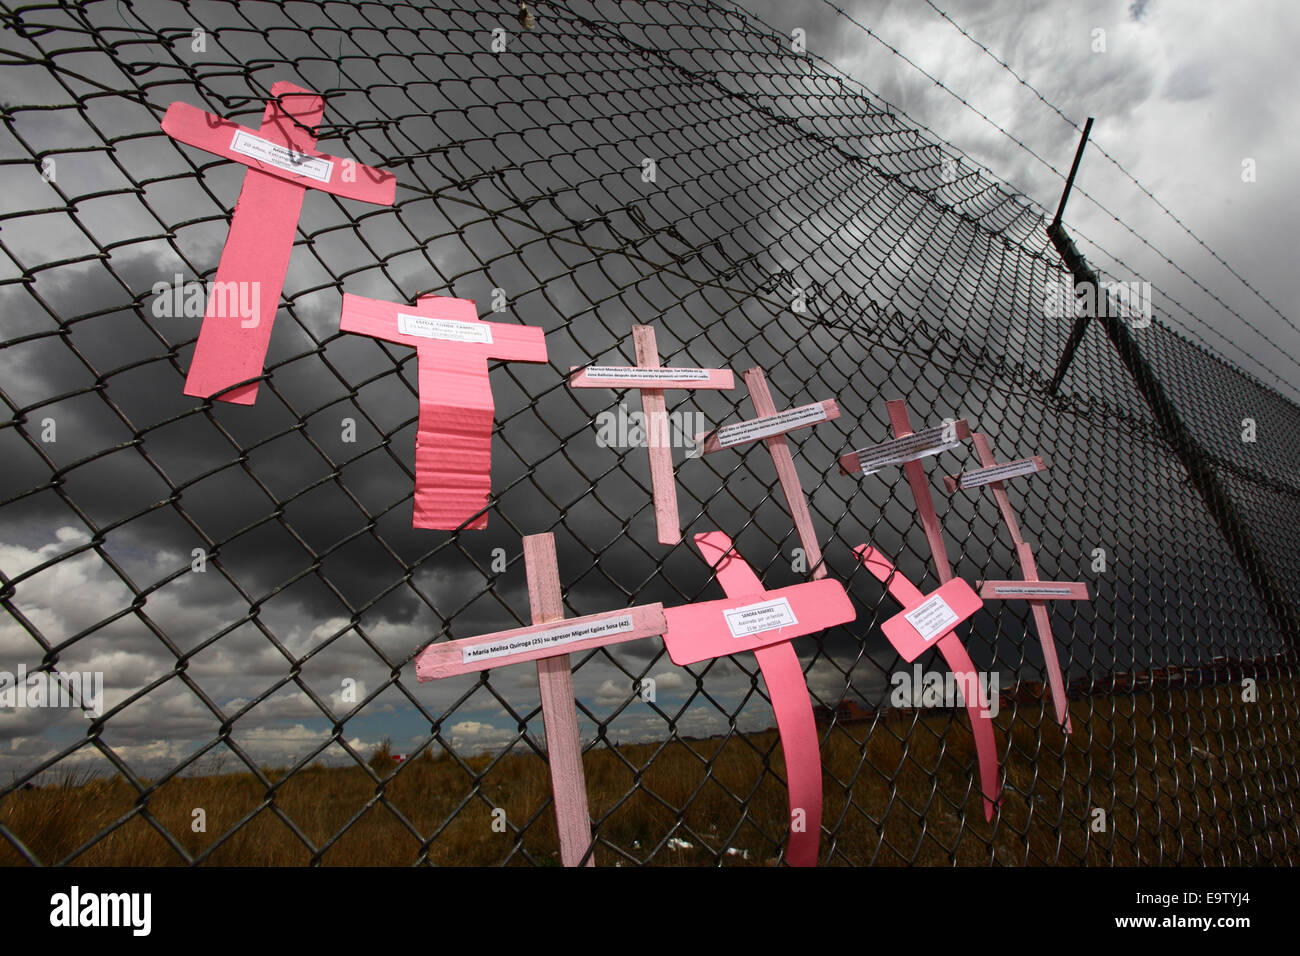 EL ALTO, BOLIVIA, 2nd November 2014. Crosses with the names of women against dark skies on a wire mesh fence, part of a memorial for recent victims of femicide and domestic violence against women. According to a WHO report in January 2013 Bolivia is the country with the highest rate of violence against women in Latin America. Credit:  James Brunker / Alamy Live News Stock Photo